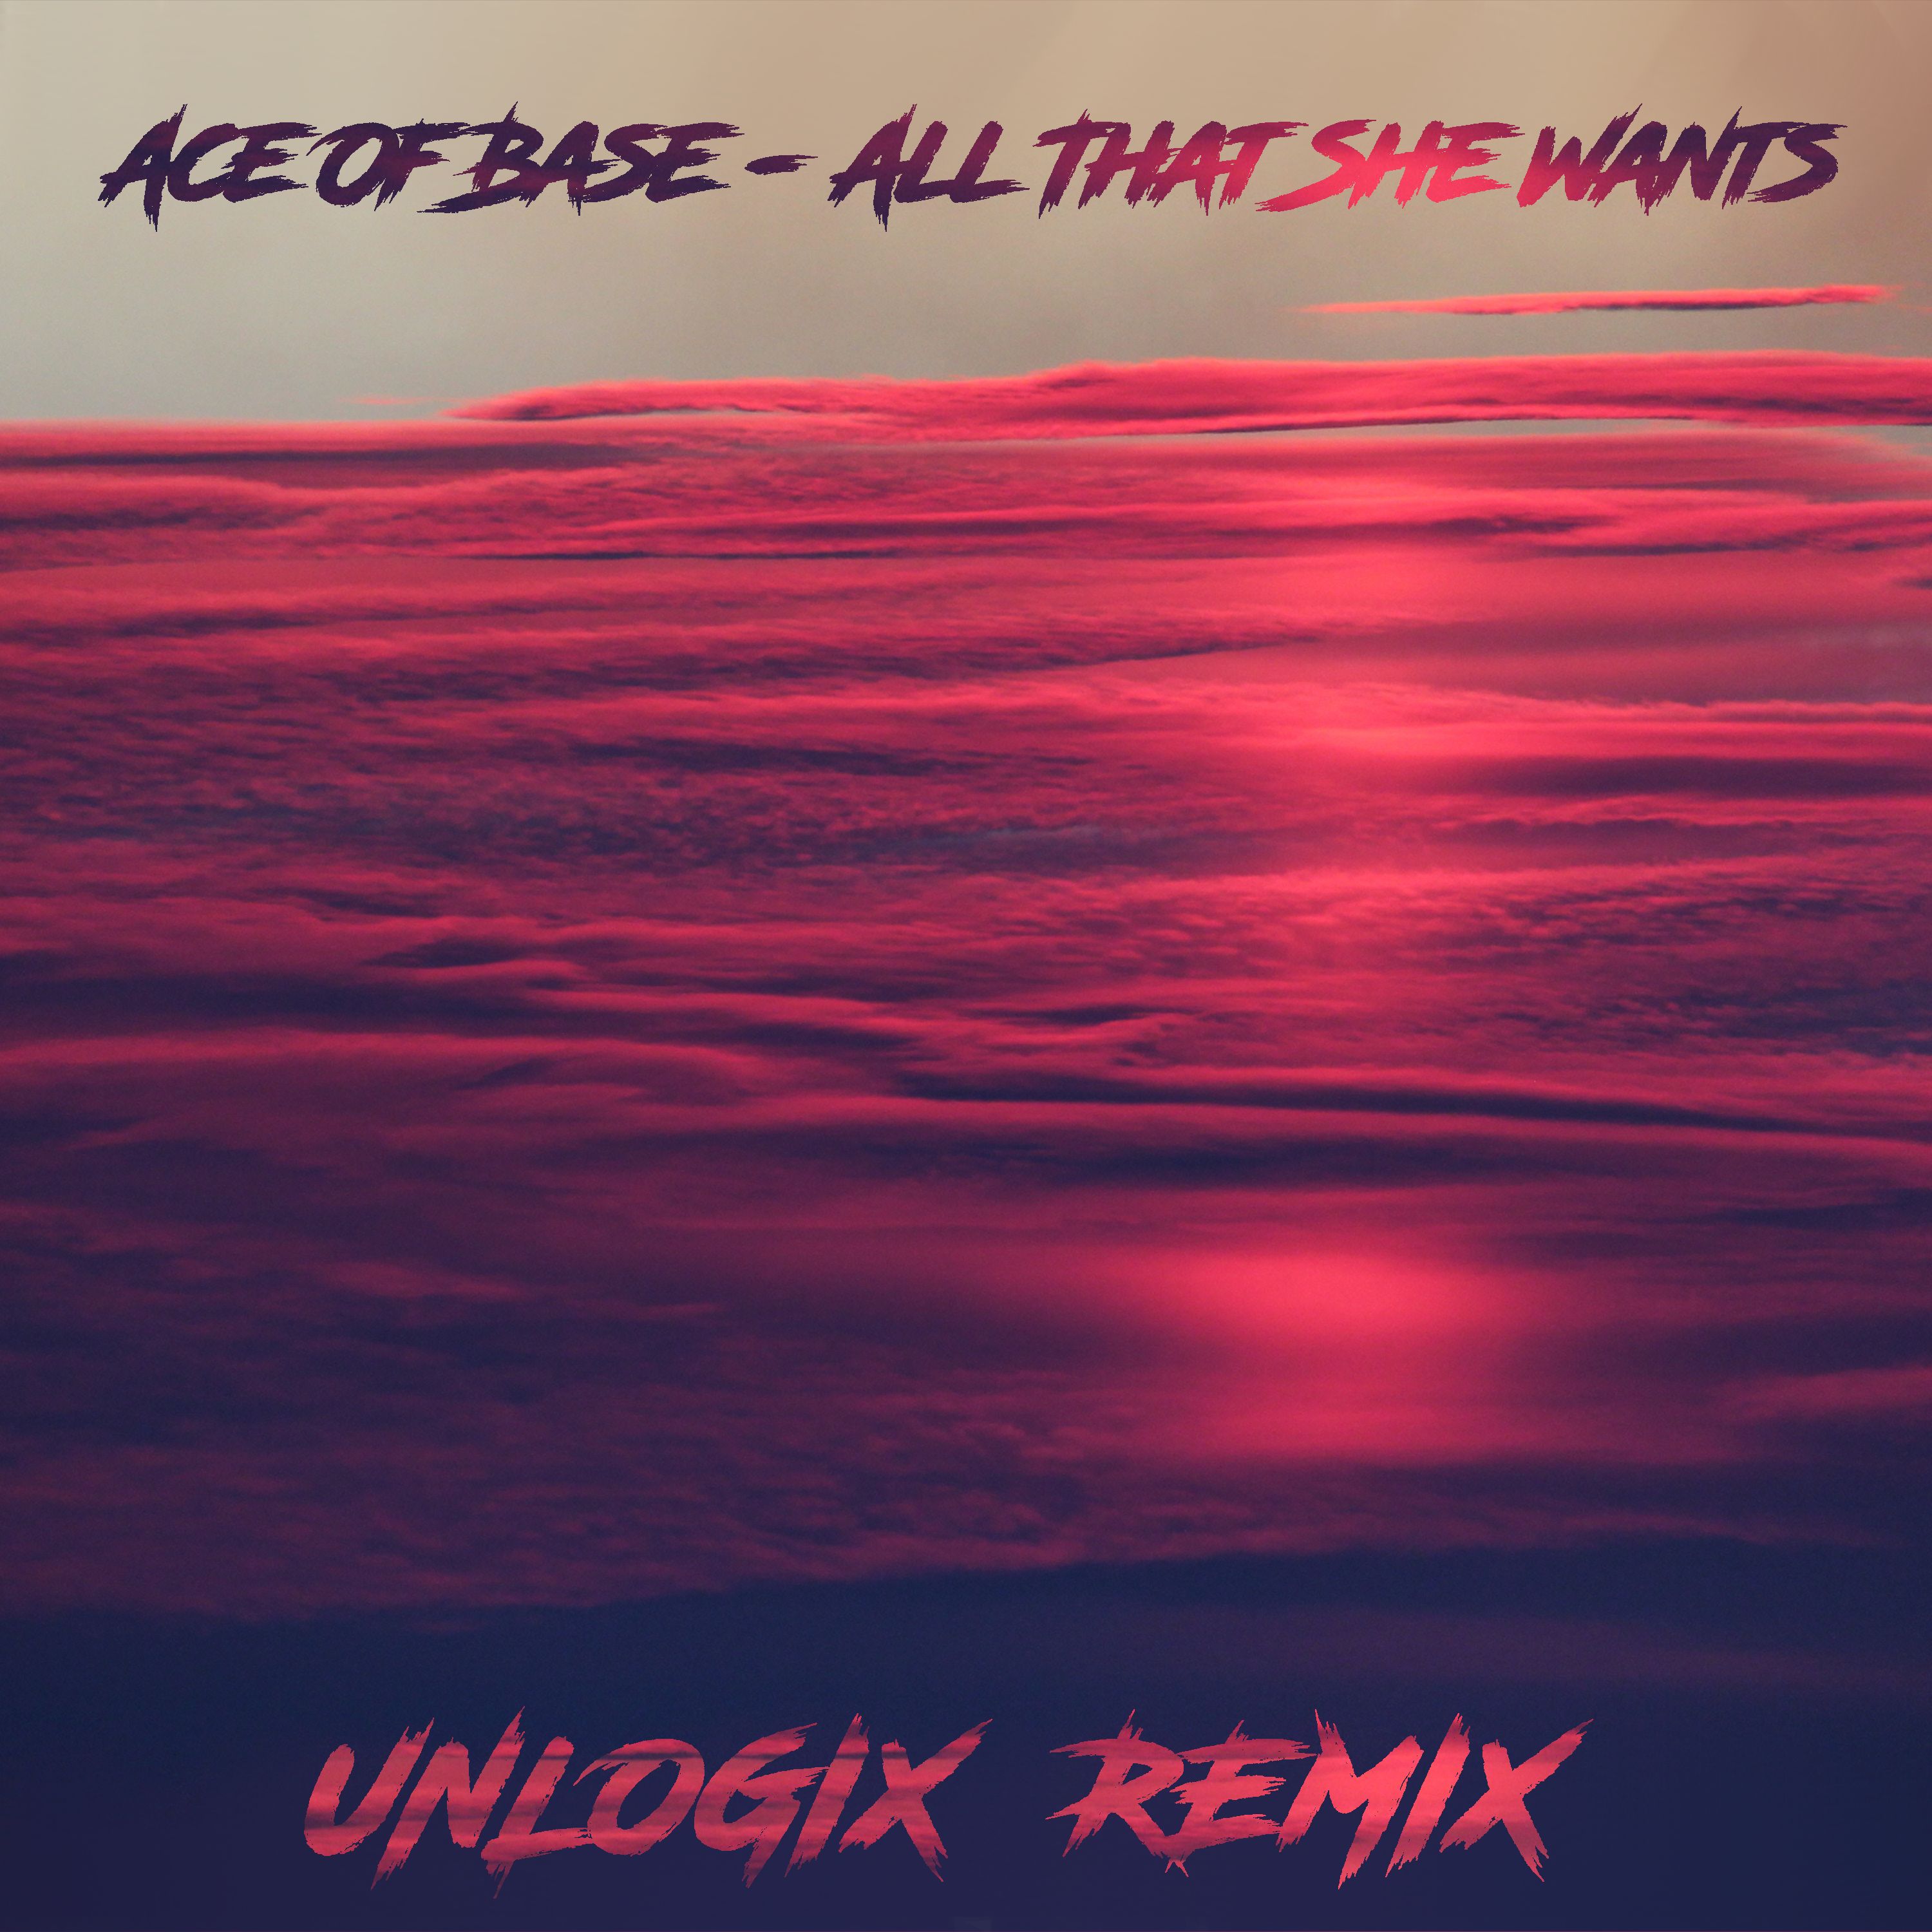 Download Ace Of Base - All That She Wants ( Unlogix Remix ) "FREE DOWNLOAD"